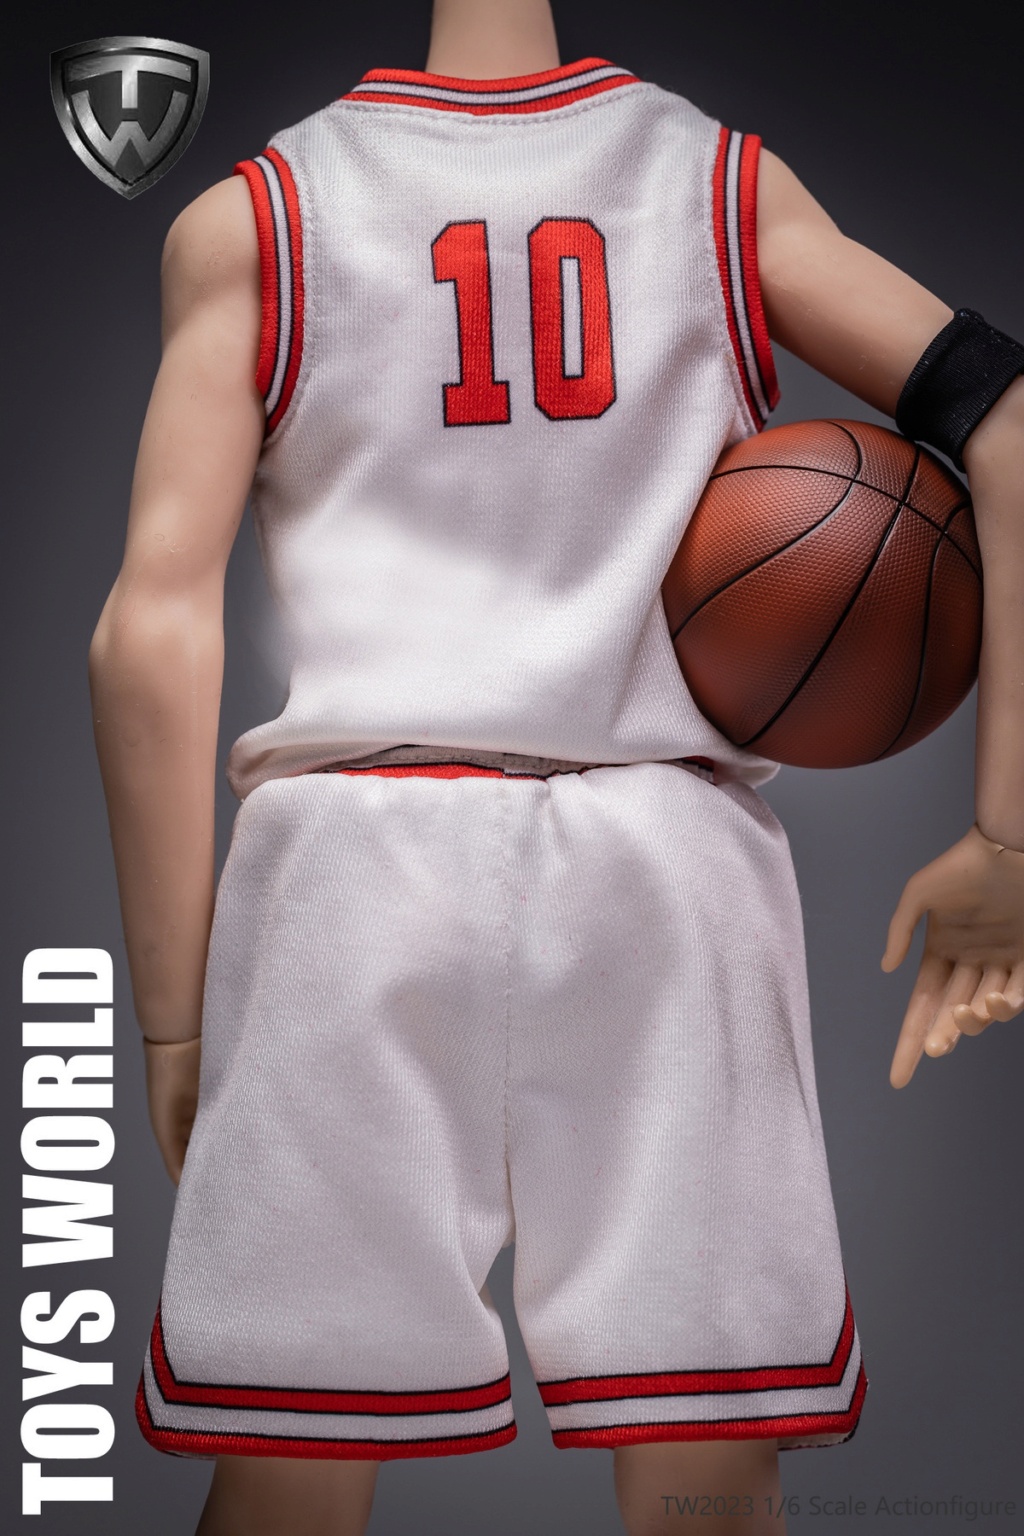 Male - NEW PRODUCT: TOYS WORLD: 1/6 Slam Dunk Ball Suit #TW2023 11255011